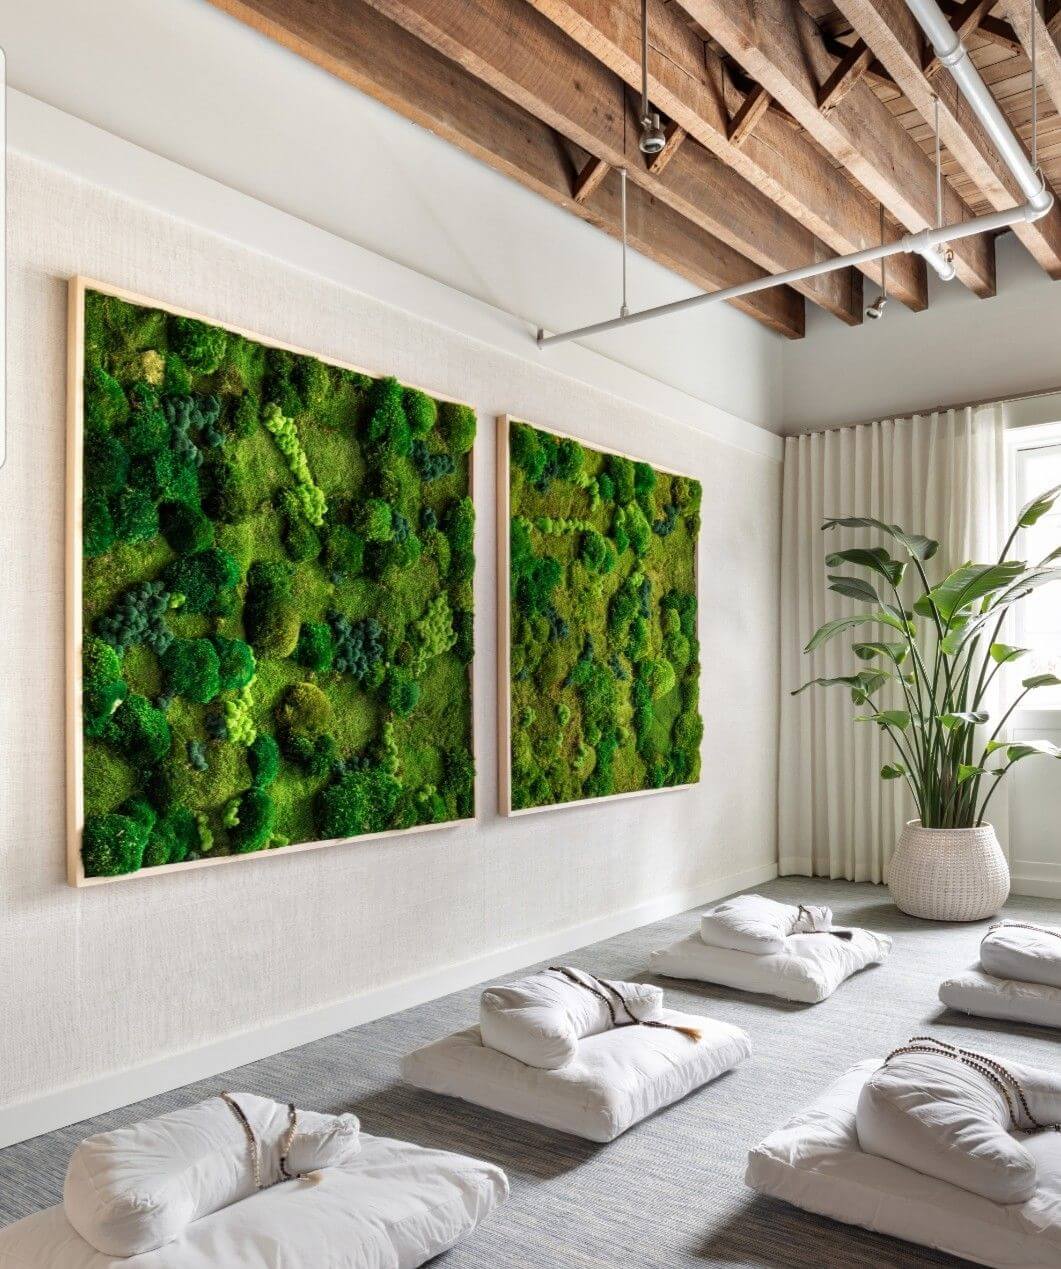 Conceptual modern interior with white cushions on the ground and moss on the walls.